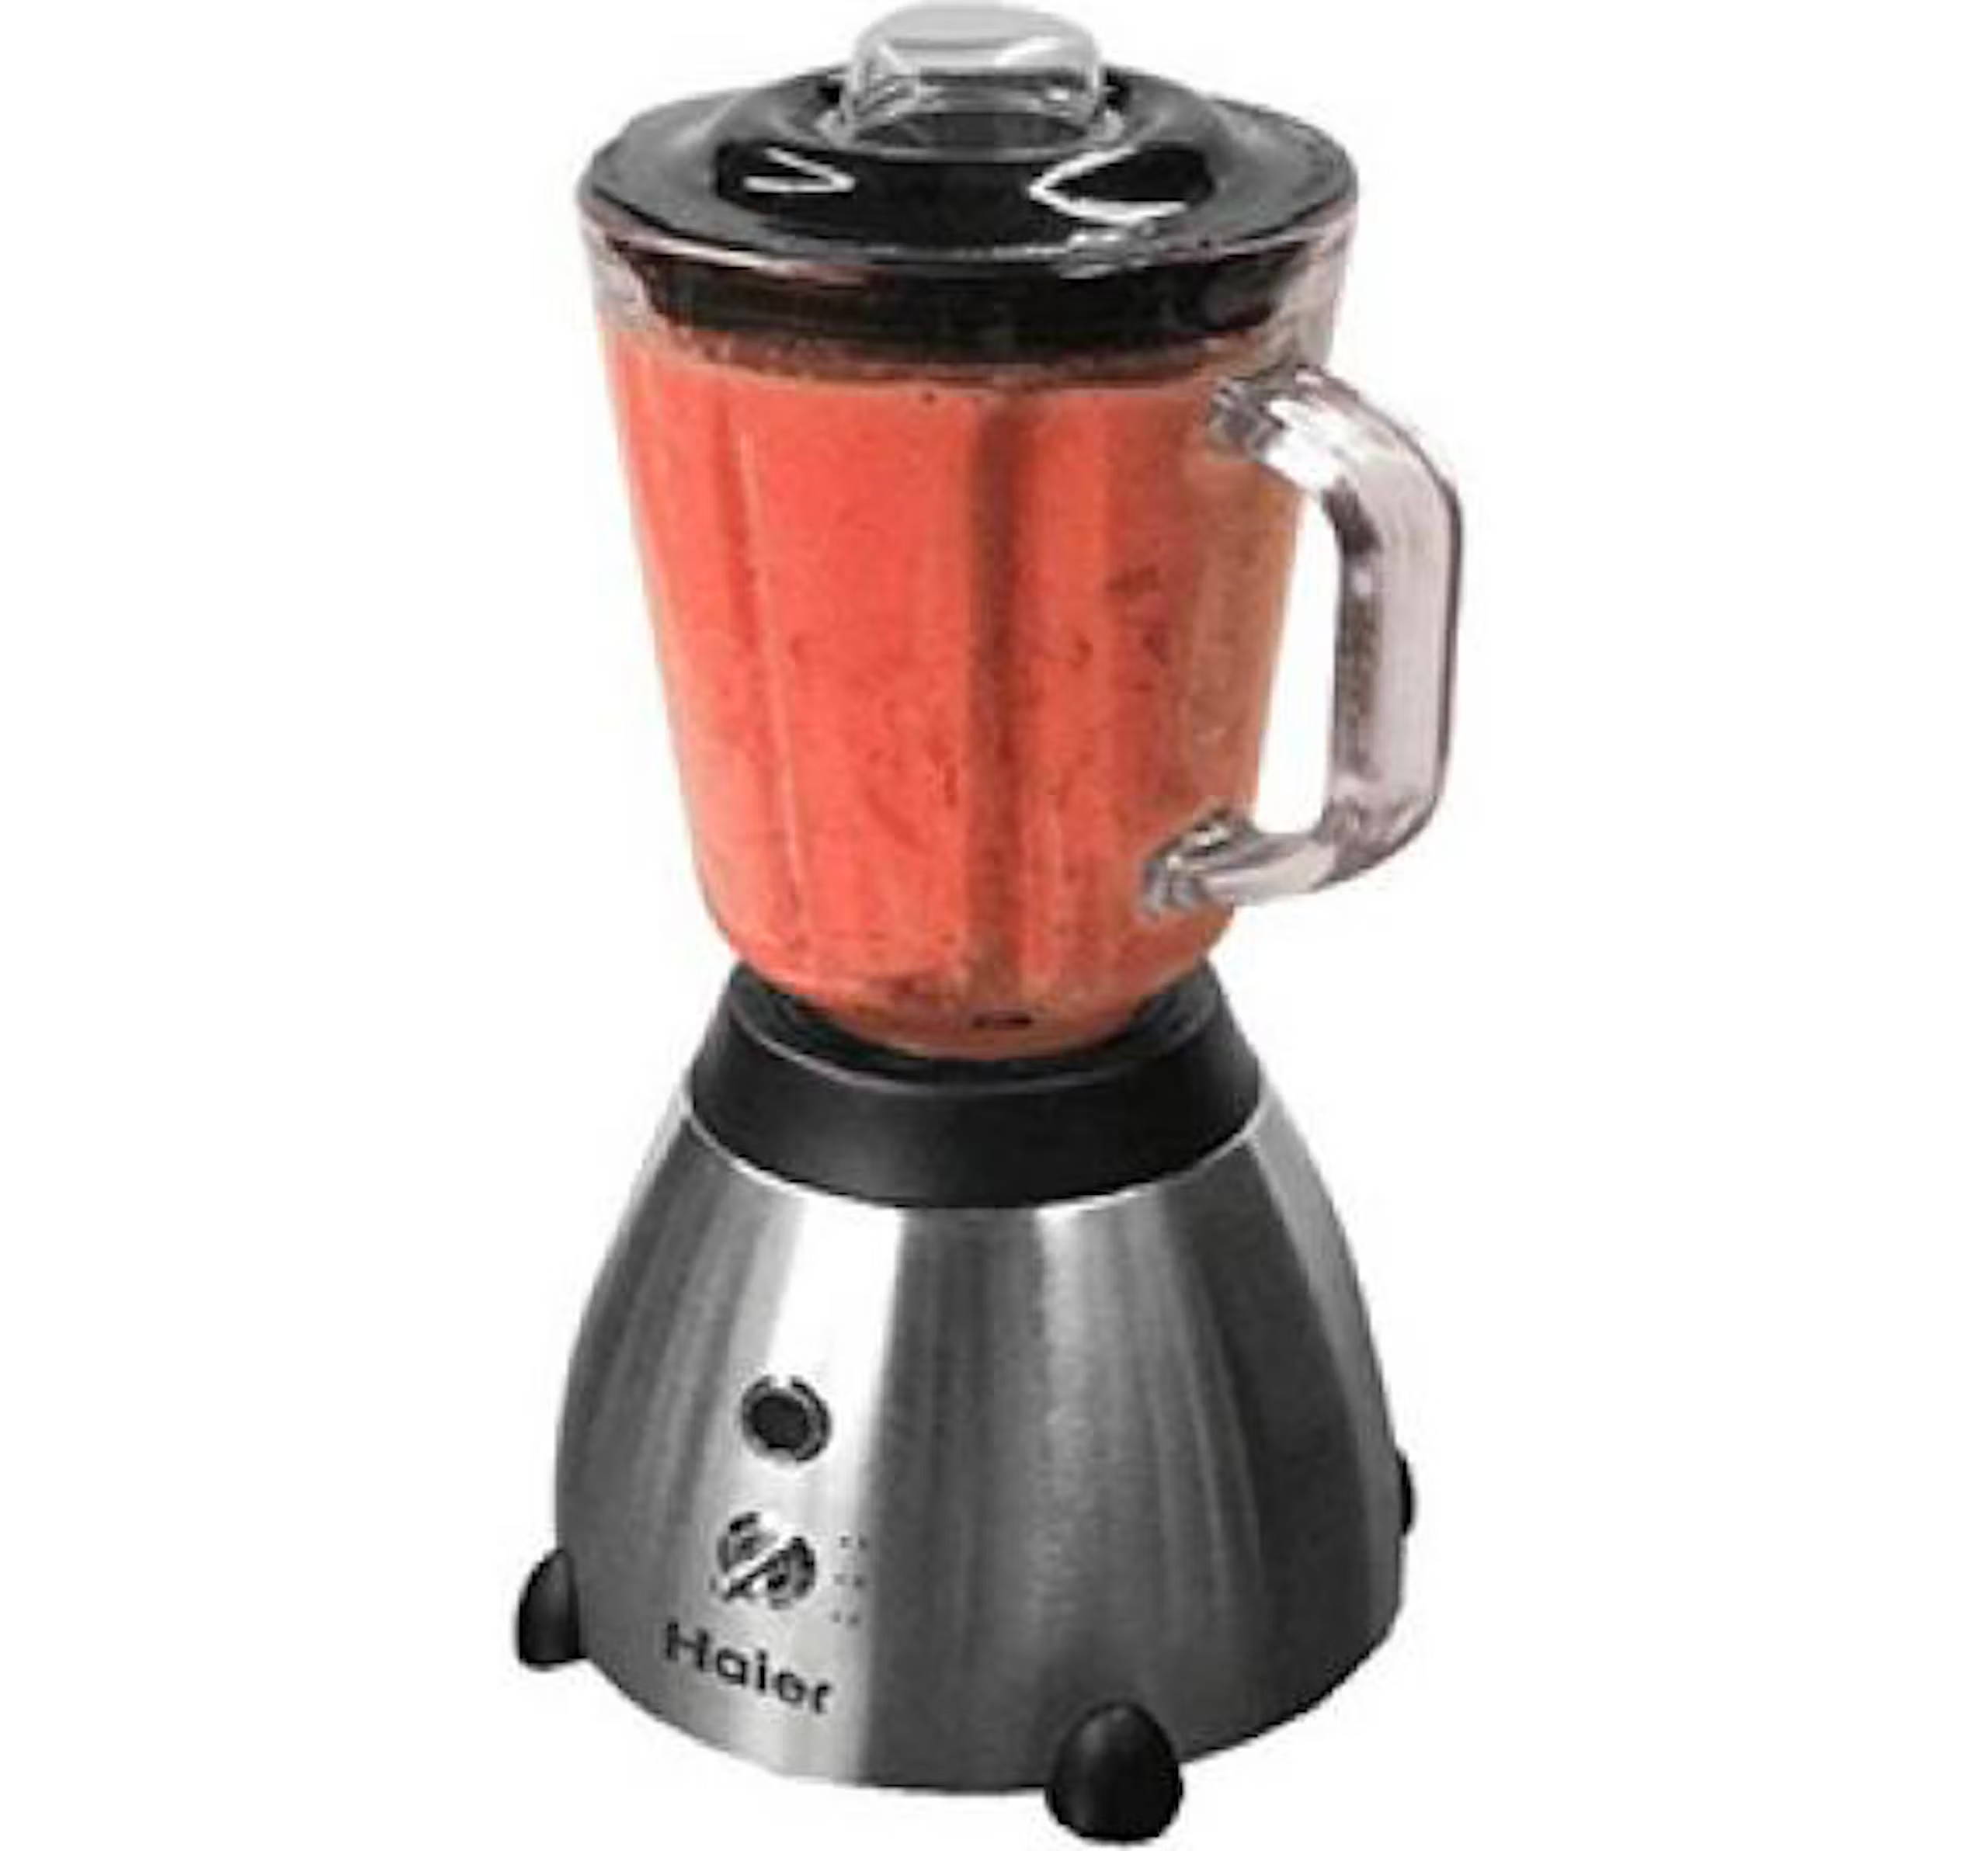 Product photo of a Haier blender currently being recalled